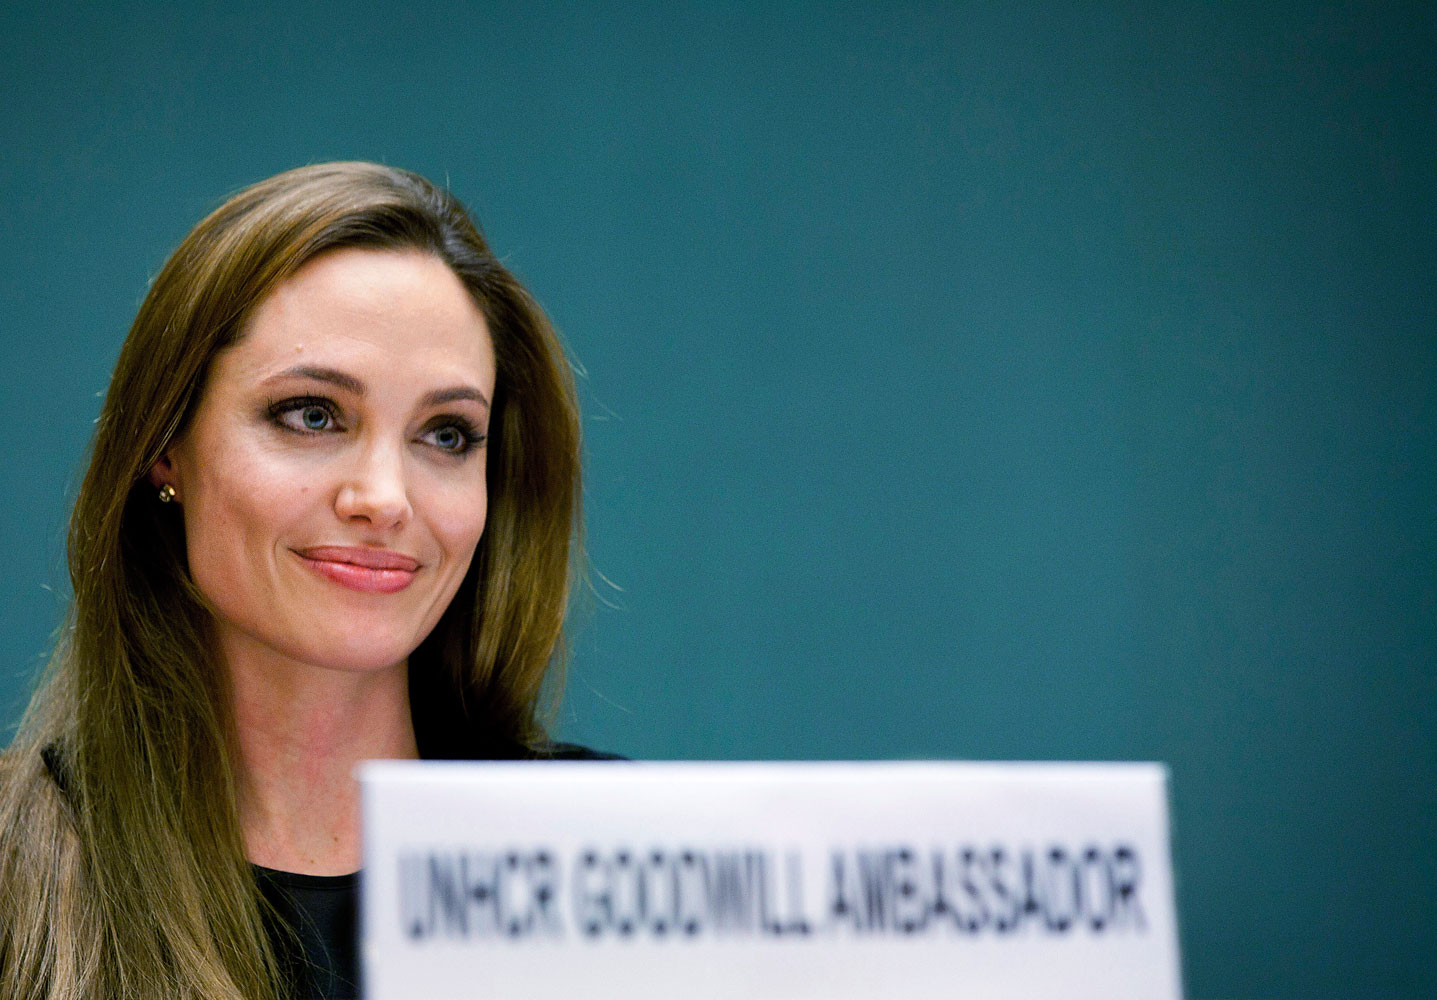 Angelina Jolie speaks during an annual meeting of UNHCR's governing executive committee in Geneva Oct. 4, 2011.